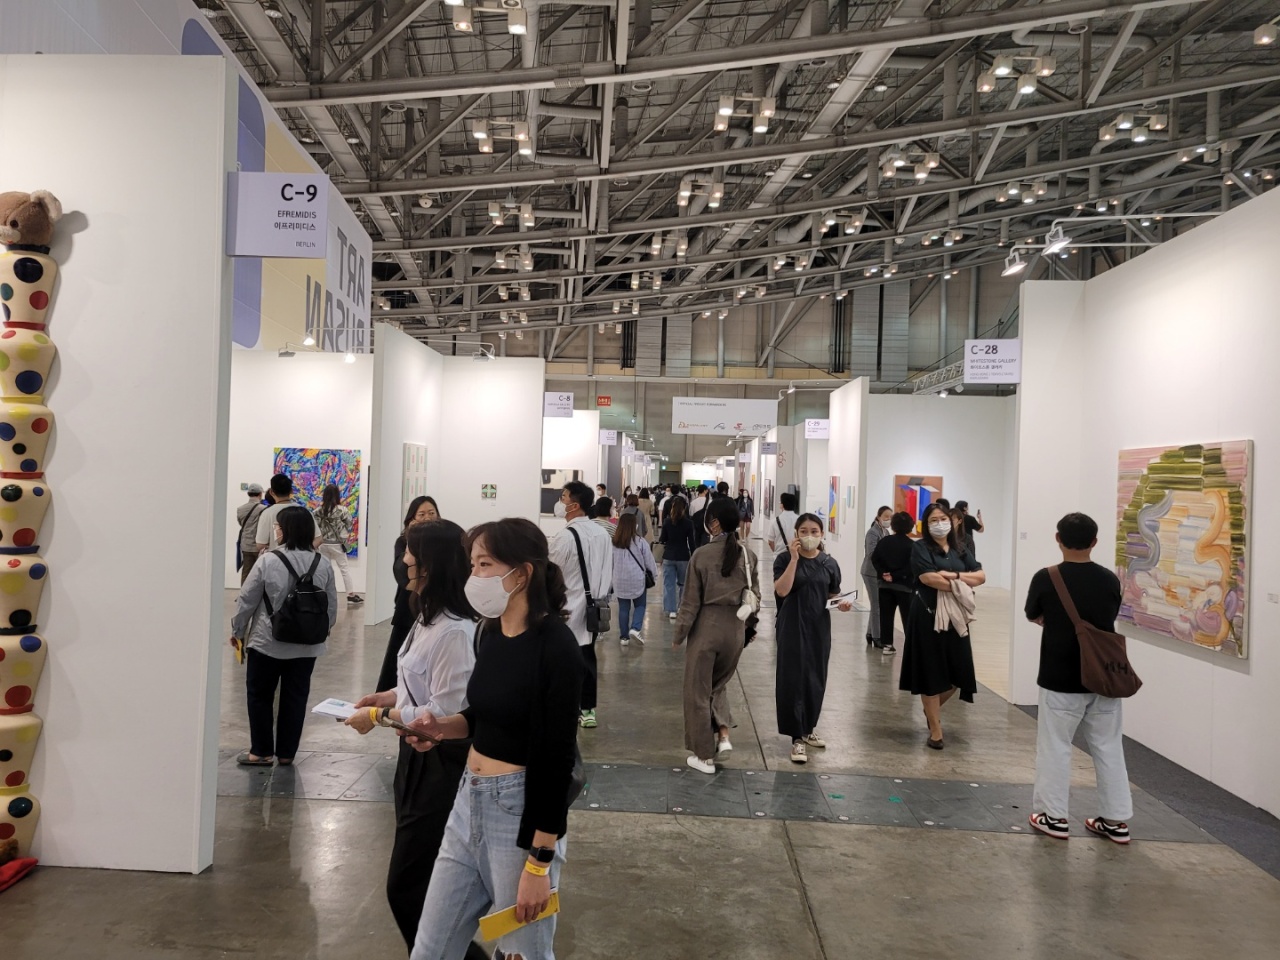 Art Busan 2022 was held from Thursday to Sunday at Bexco Exhibition Center in Busan. (Park Yuna/The Korea Herald)